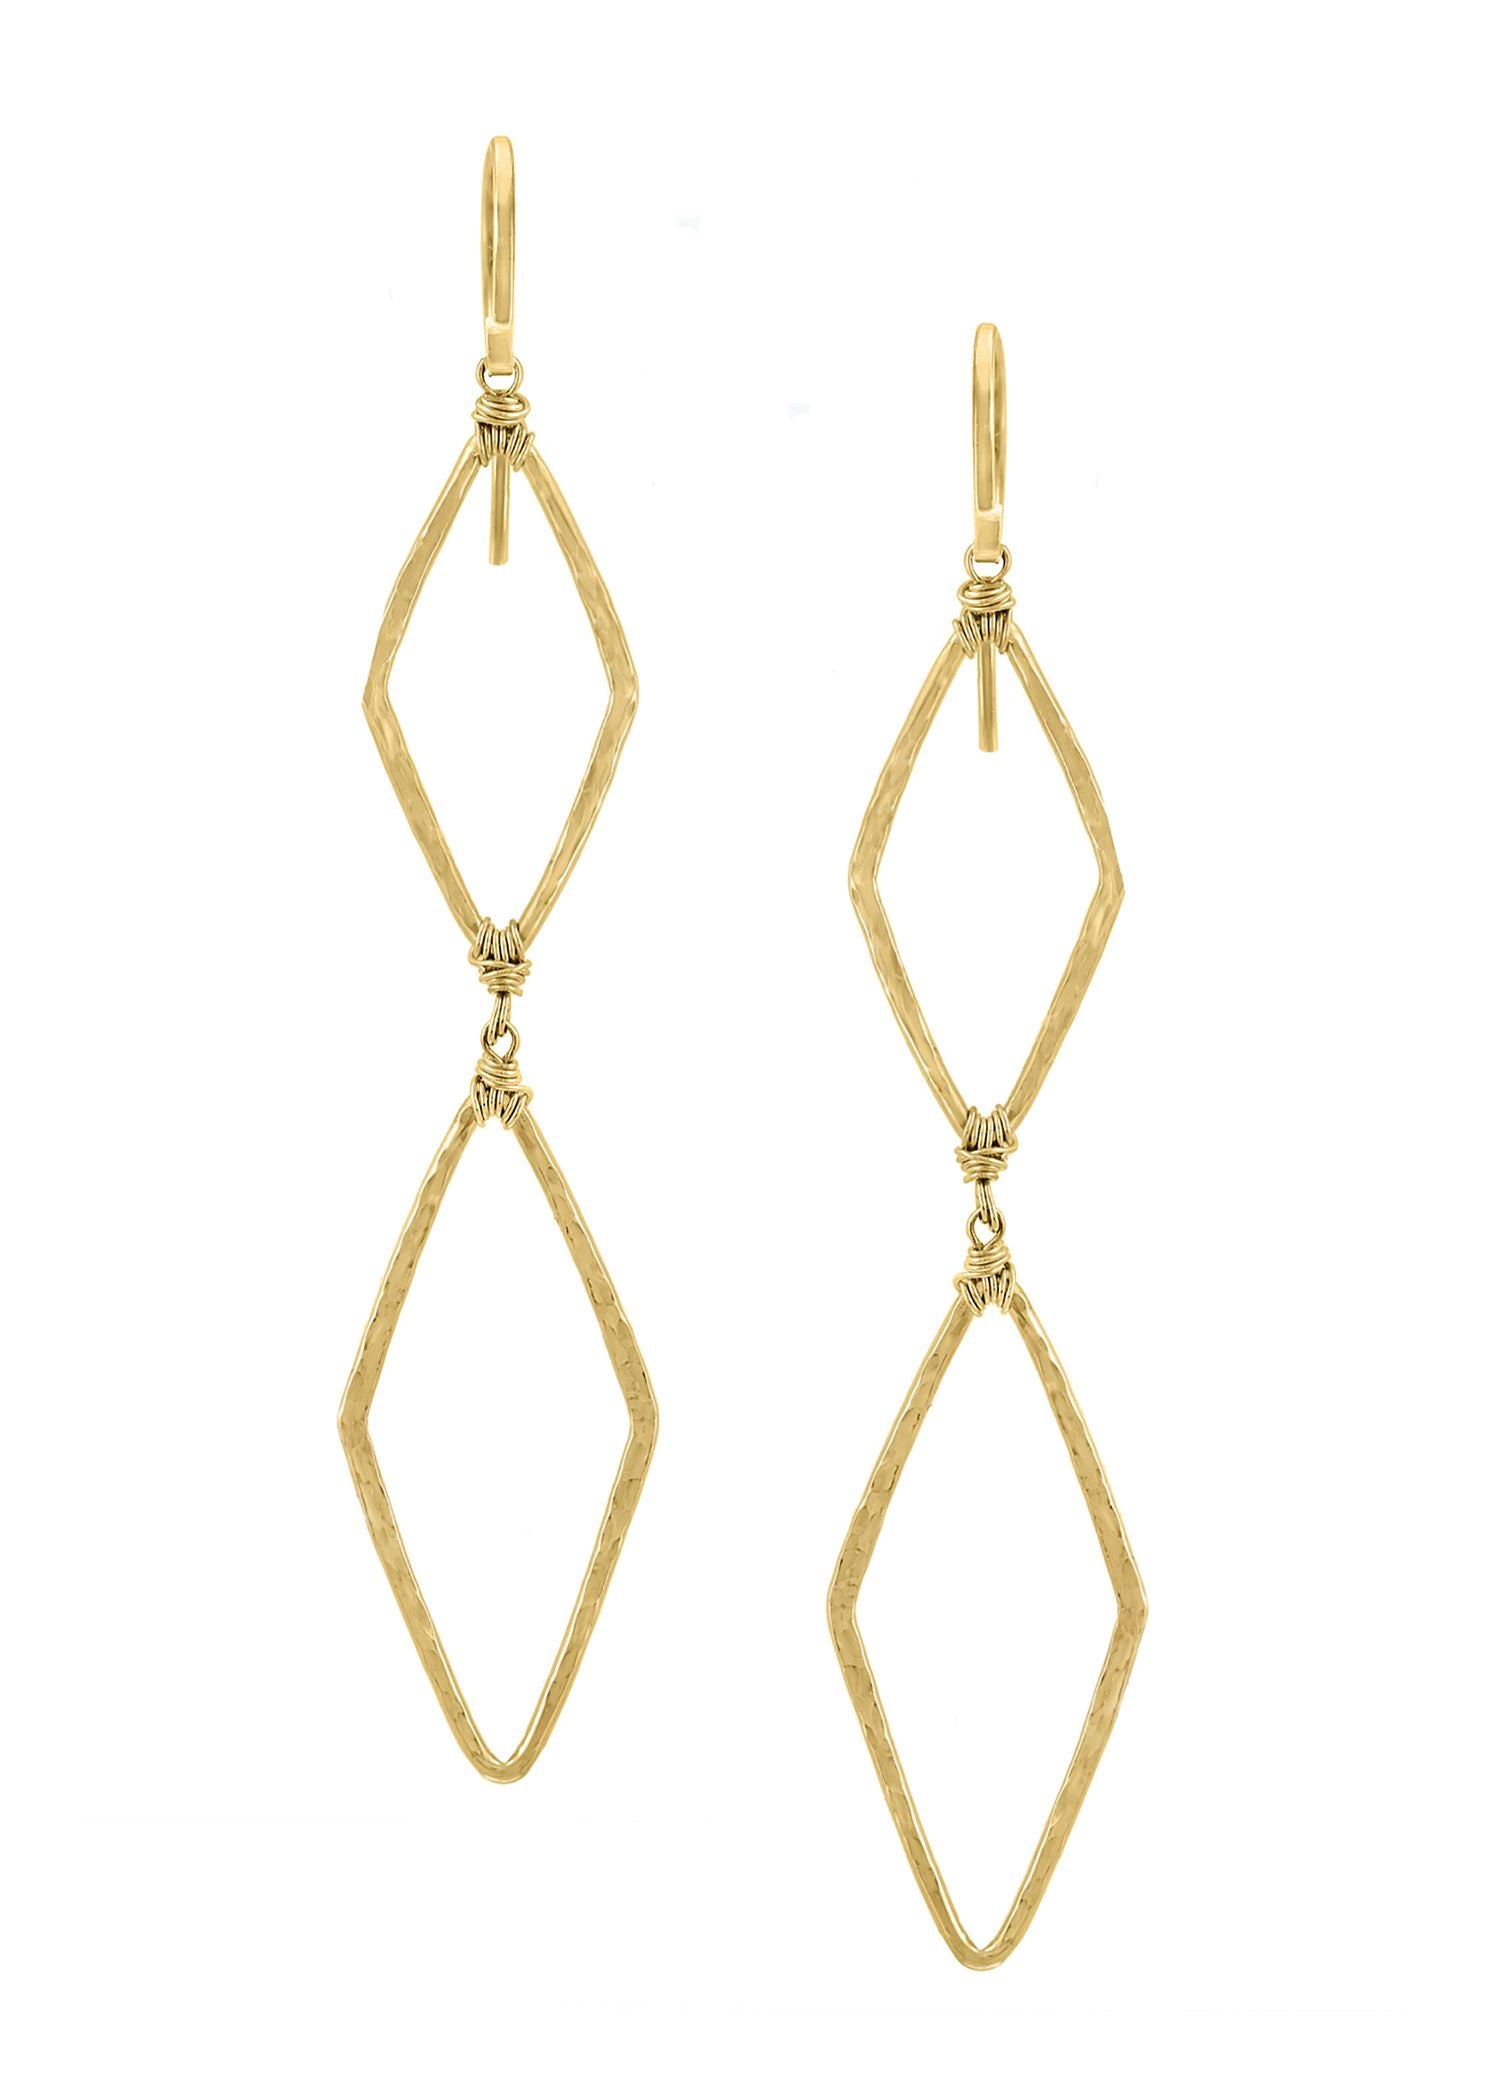 14k gold fill Earrings measure 2-3/4" in length (including the ear wires) and 9/16" in width Handmade in our Los Angeles studio